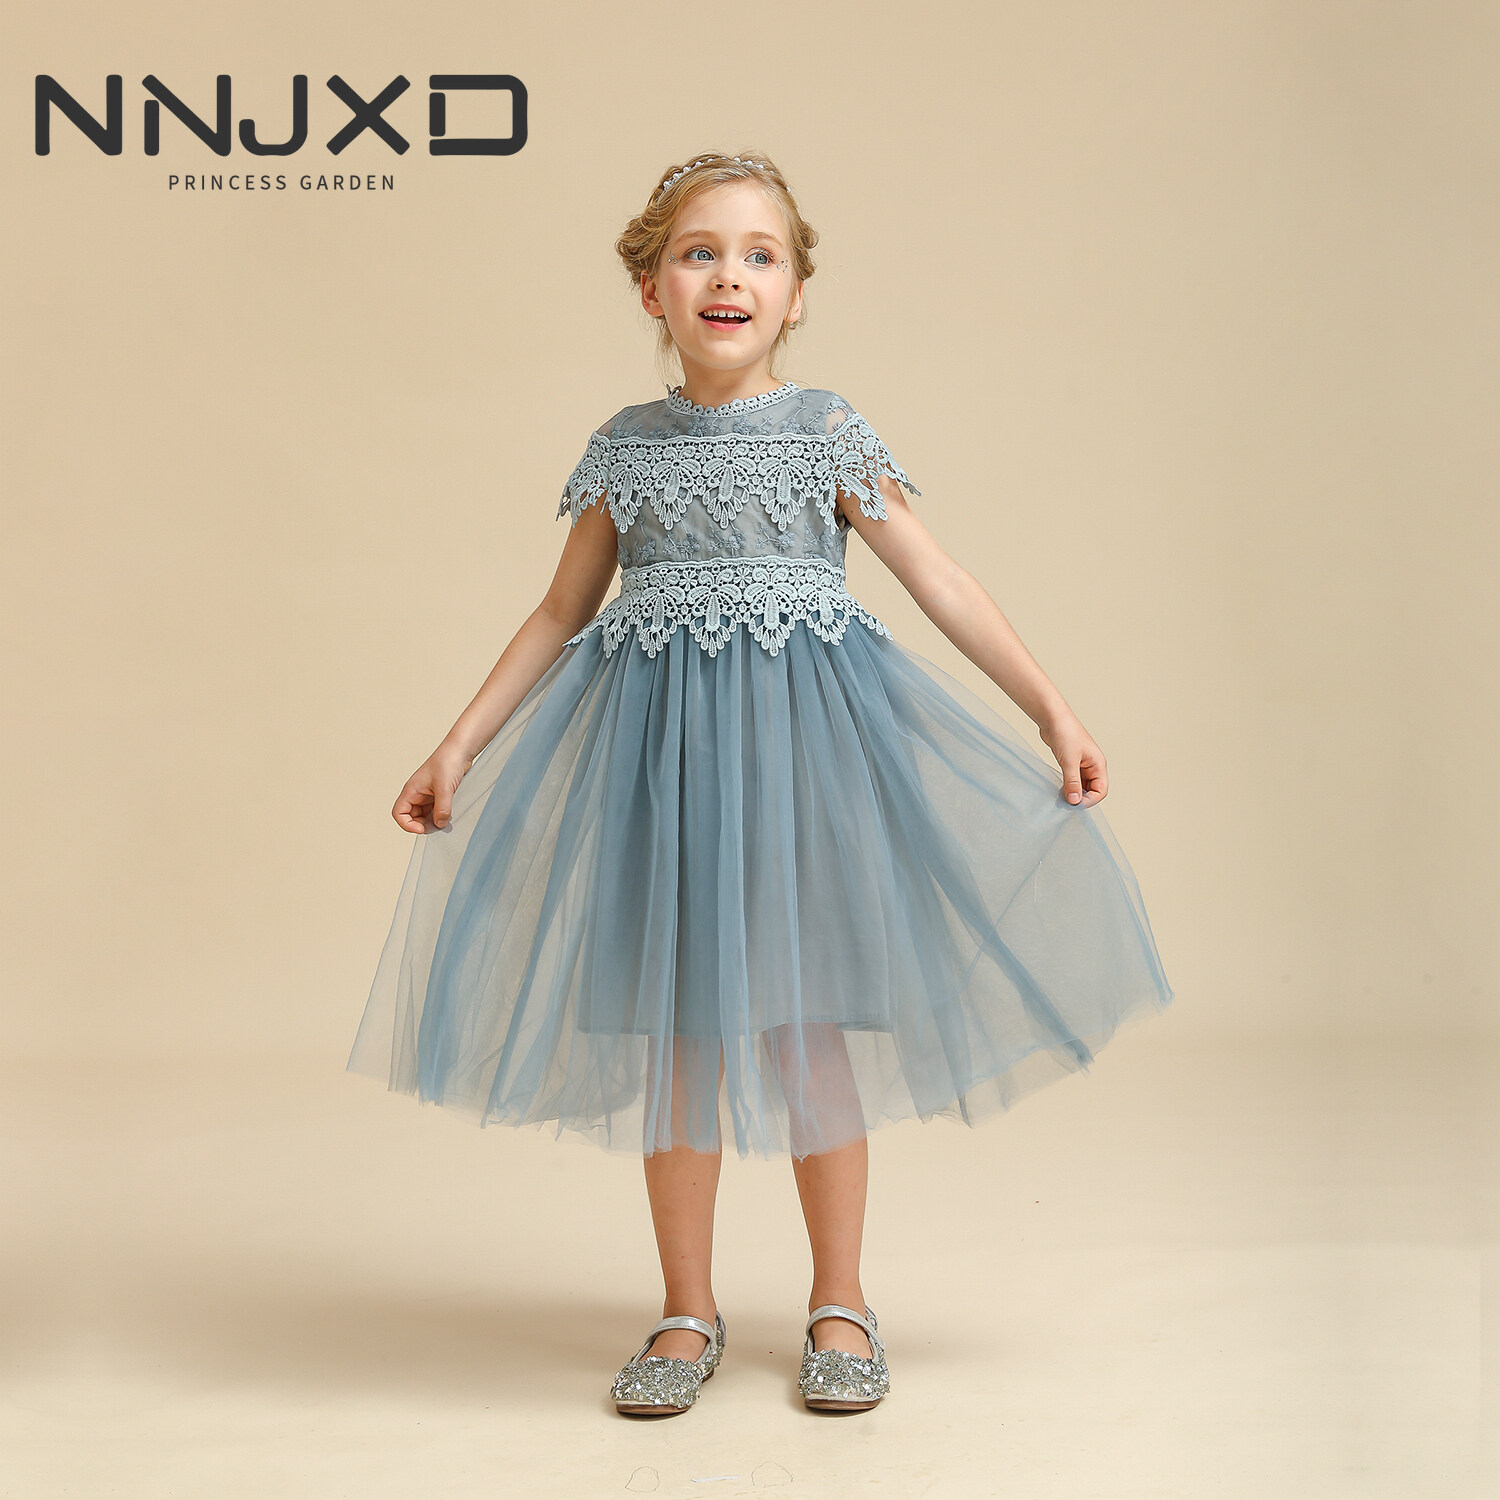 NNJXD Baby Girl Cloths 3-8 Years Old Girls Lace Long Dress Fairy